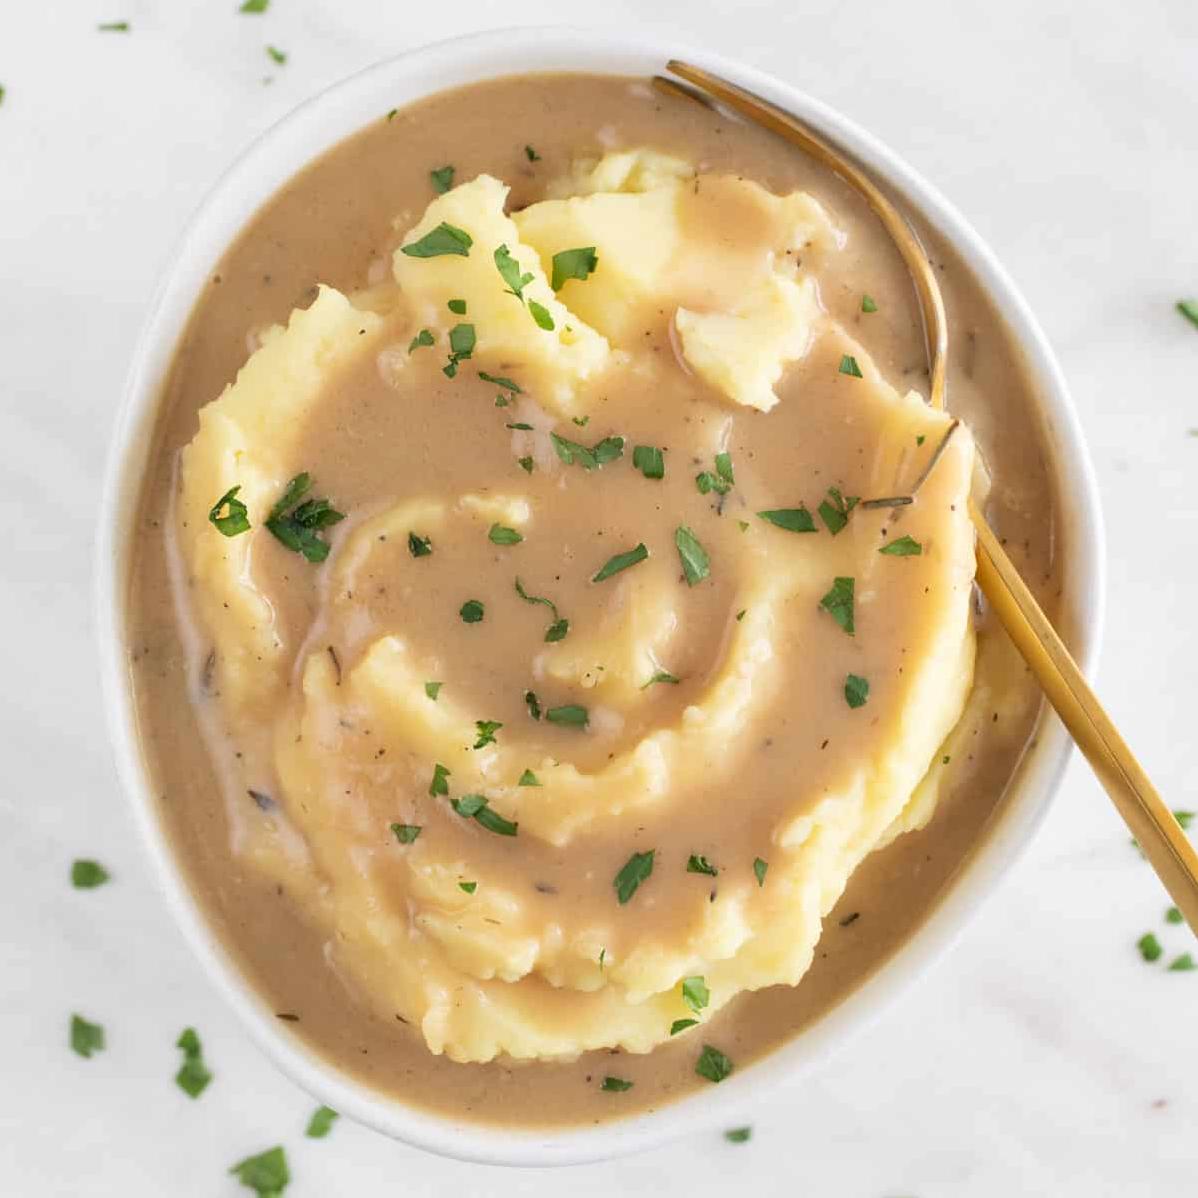  Vegan cheese sauce to pour over your nachos or dip your veggies in.